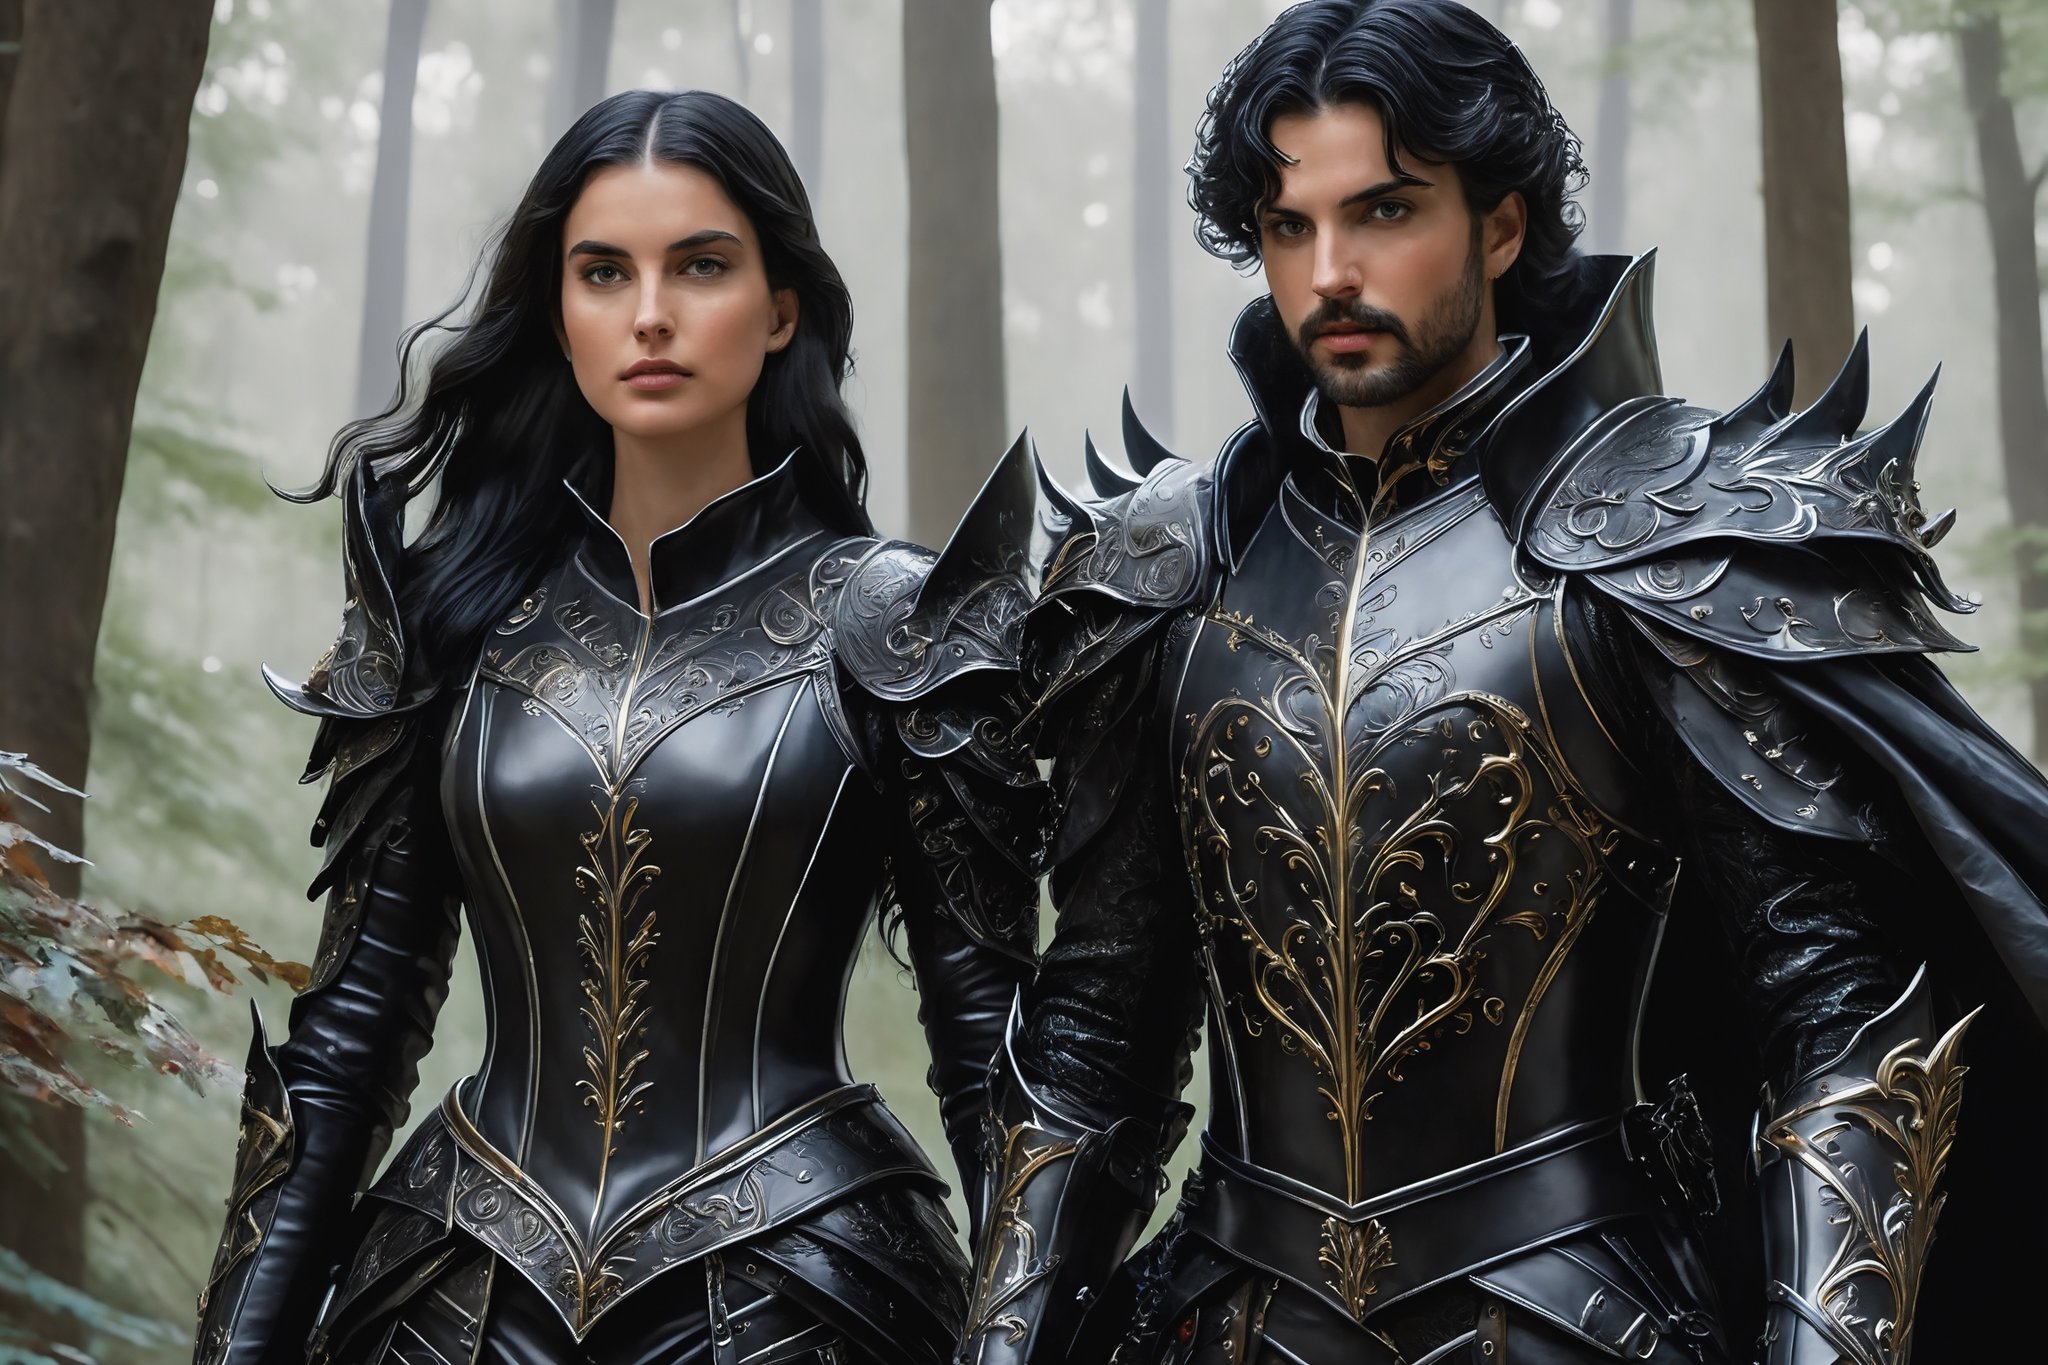 masterpiece, high_res, high quality,
stunningly beautiful splash art of a black knight and queen in a forest, They must be incredibly attractive, faces visible, 15th century leather armor. ((((Over the top of her suit they wear a loose cloak)))). The picture should be epic and memorable. Incredibly meticulous attention to detail. The result should be a combination of handwritten painting and realistic graphics. Use the experience of the best video game studios.
 
,Leonardo Style,DonMN1gh7D3m0nXL